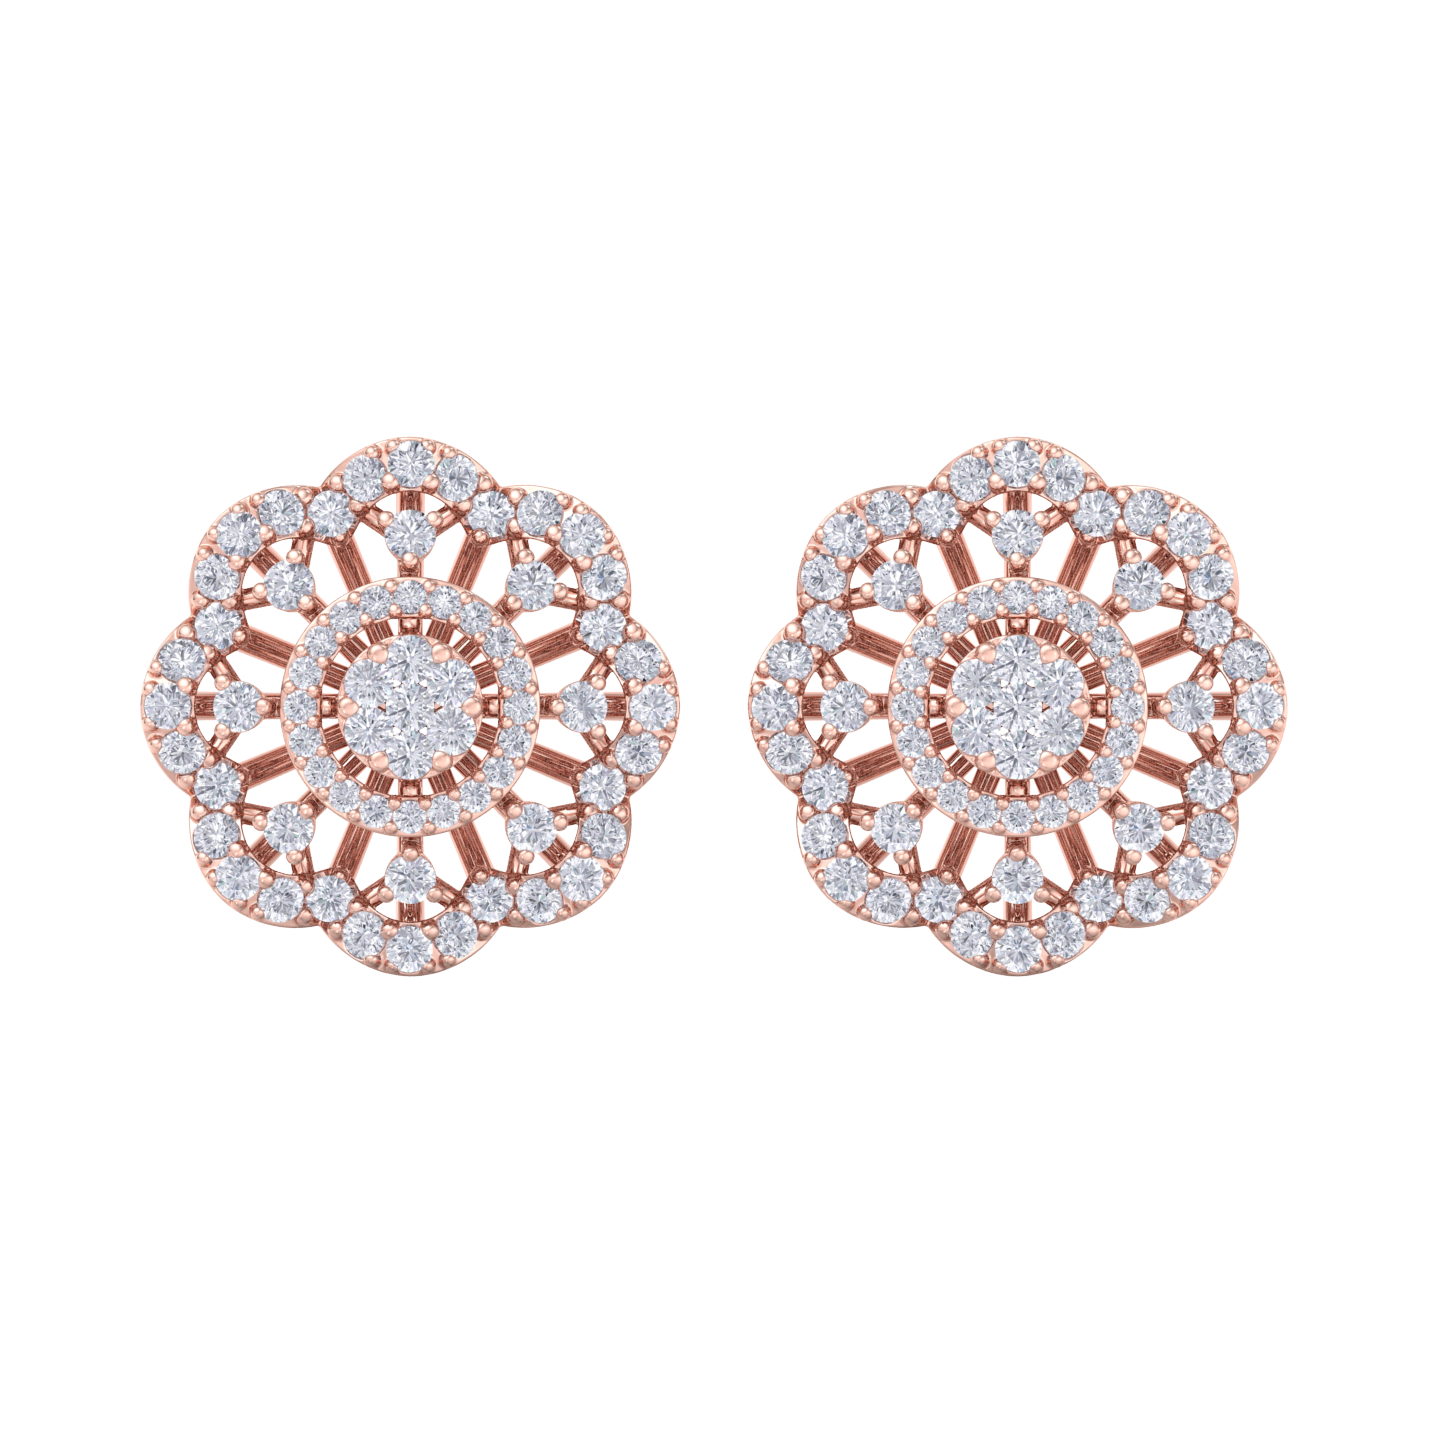 Stud earrings in rose gold with white diamonds of 1.14 ct in weight